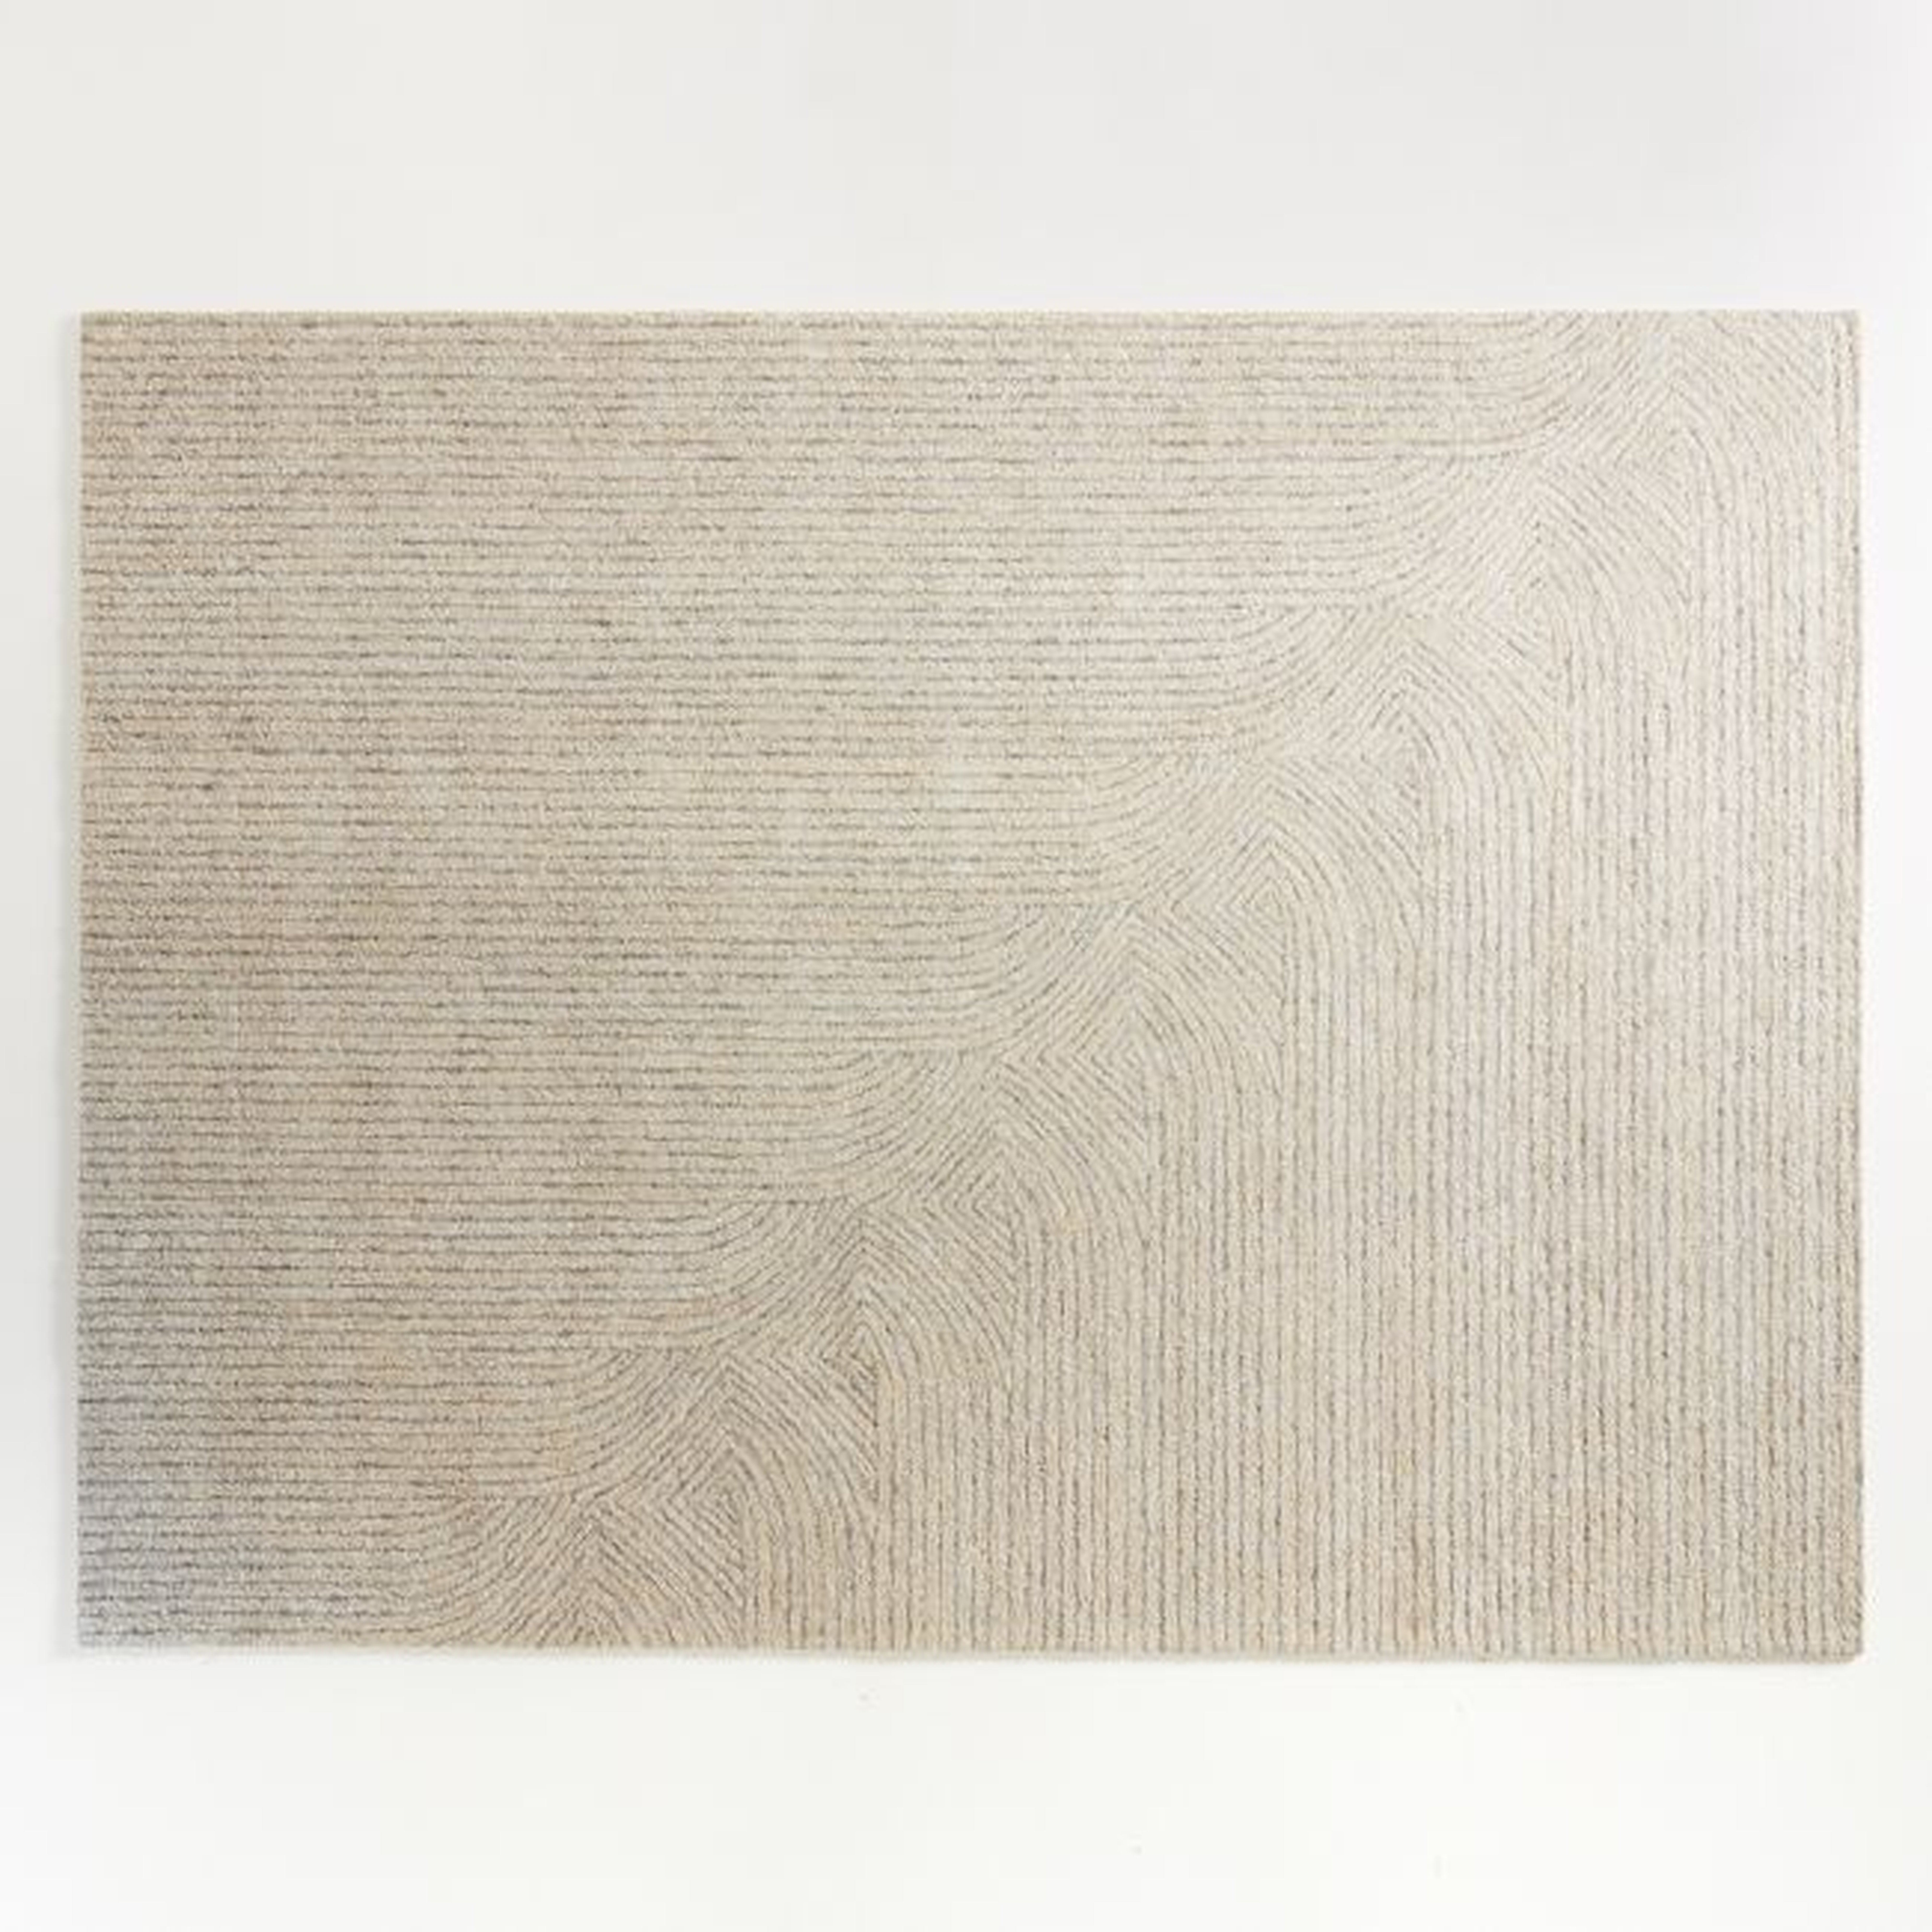 Thorens Rug 9'x12' - Crate and Barrel